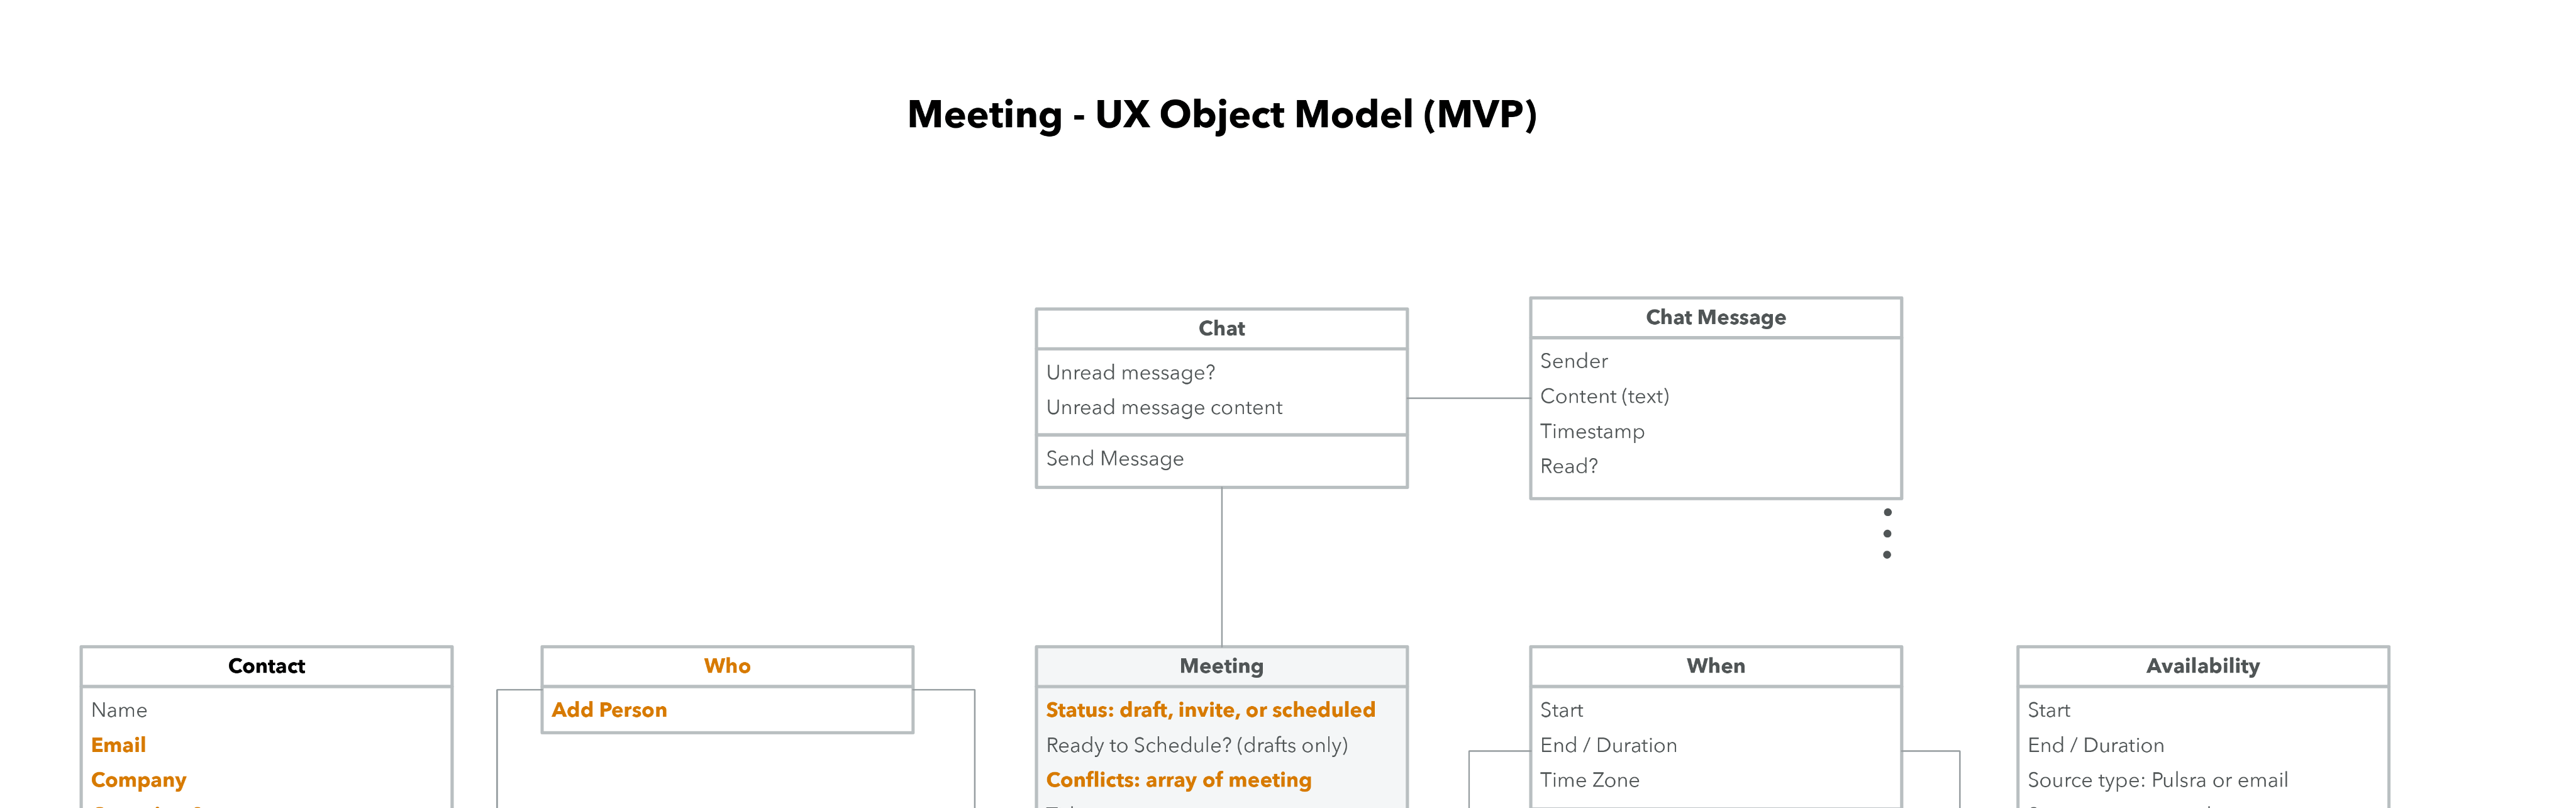 UX-level object model for a
meeting